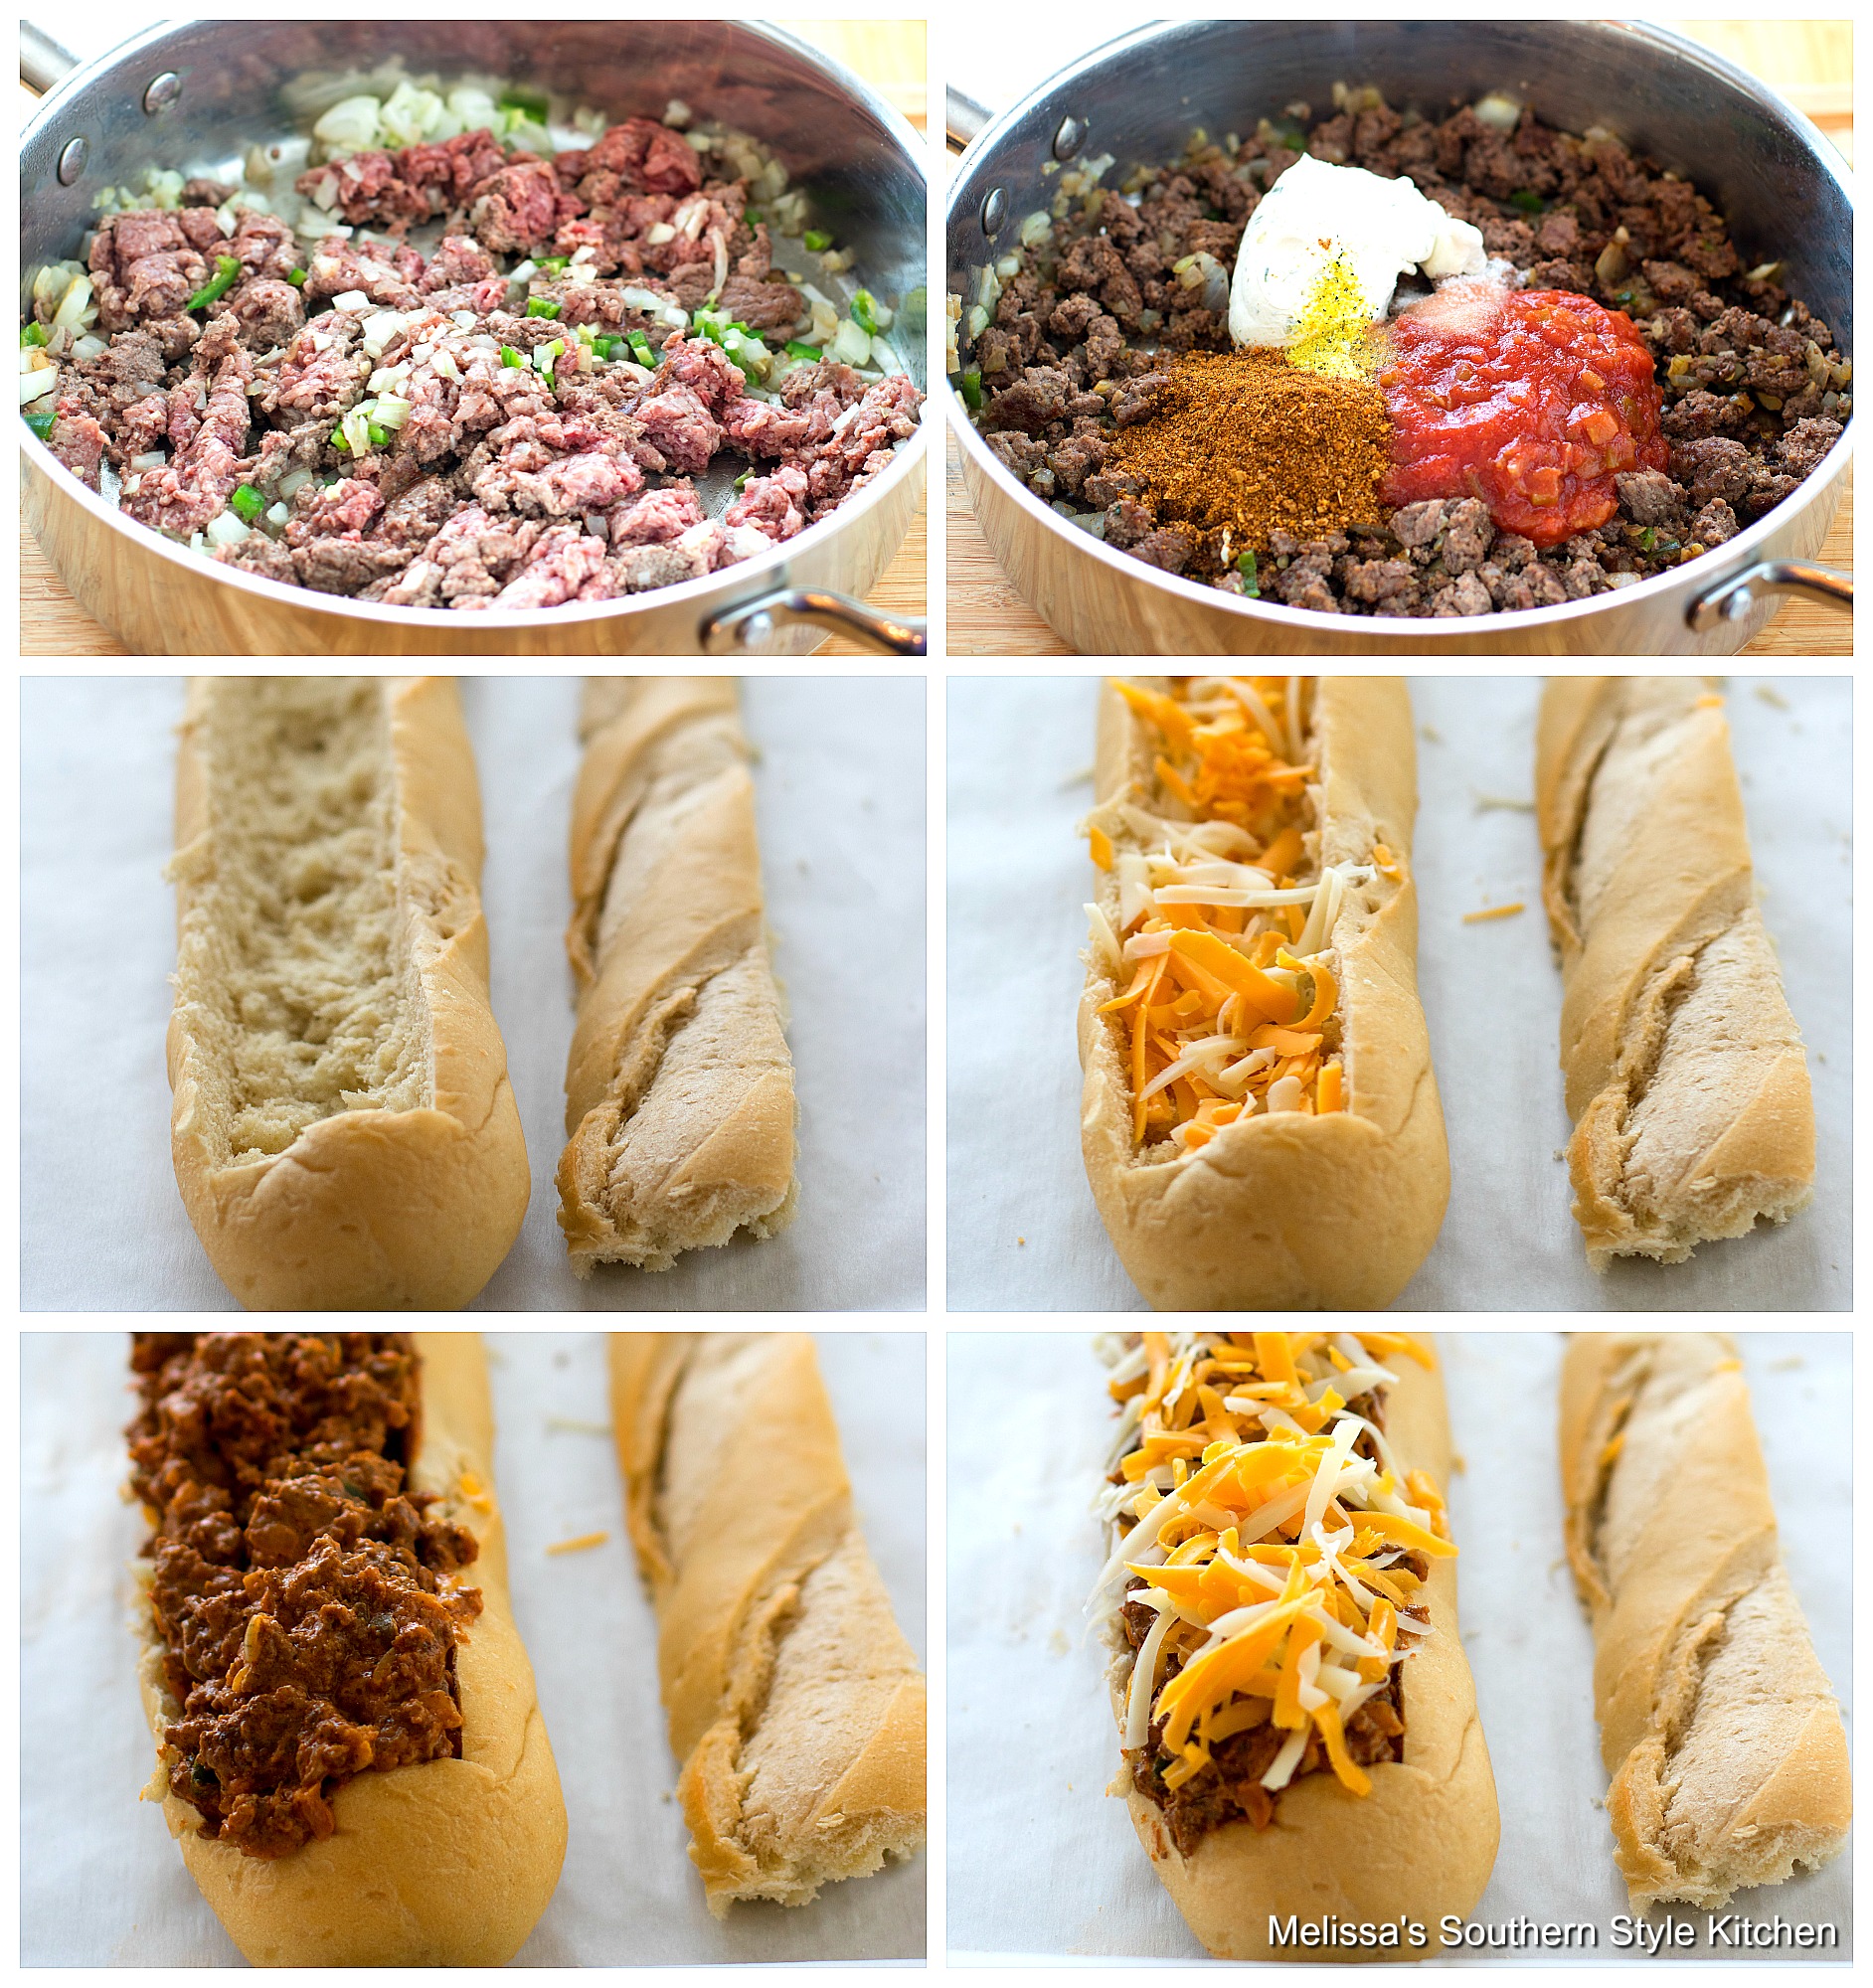 Step-by-step preparation images and ingredients for Stuffed Taco Bread